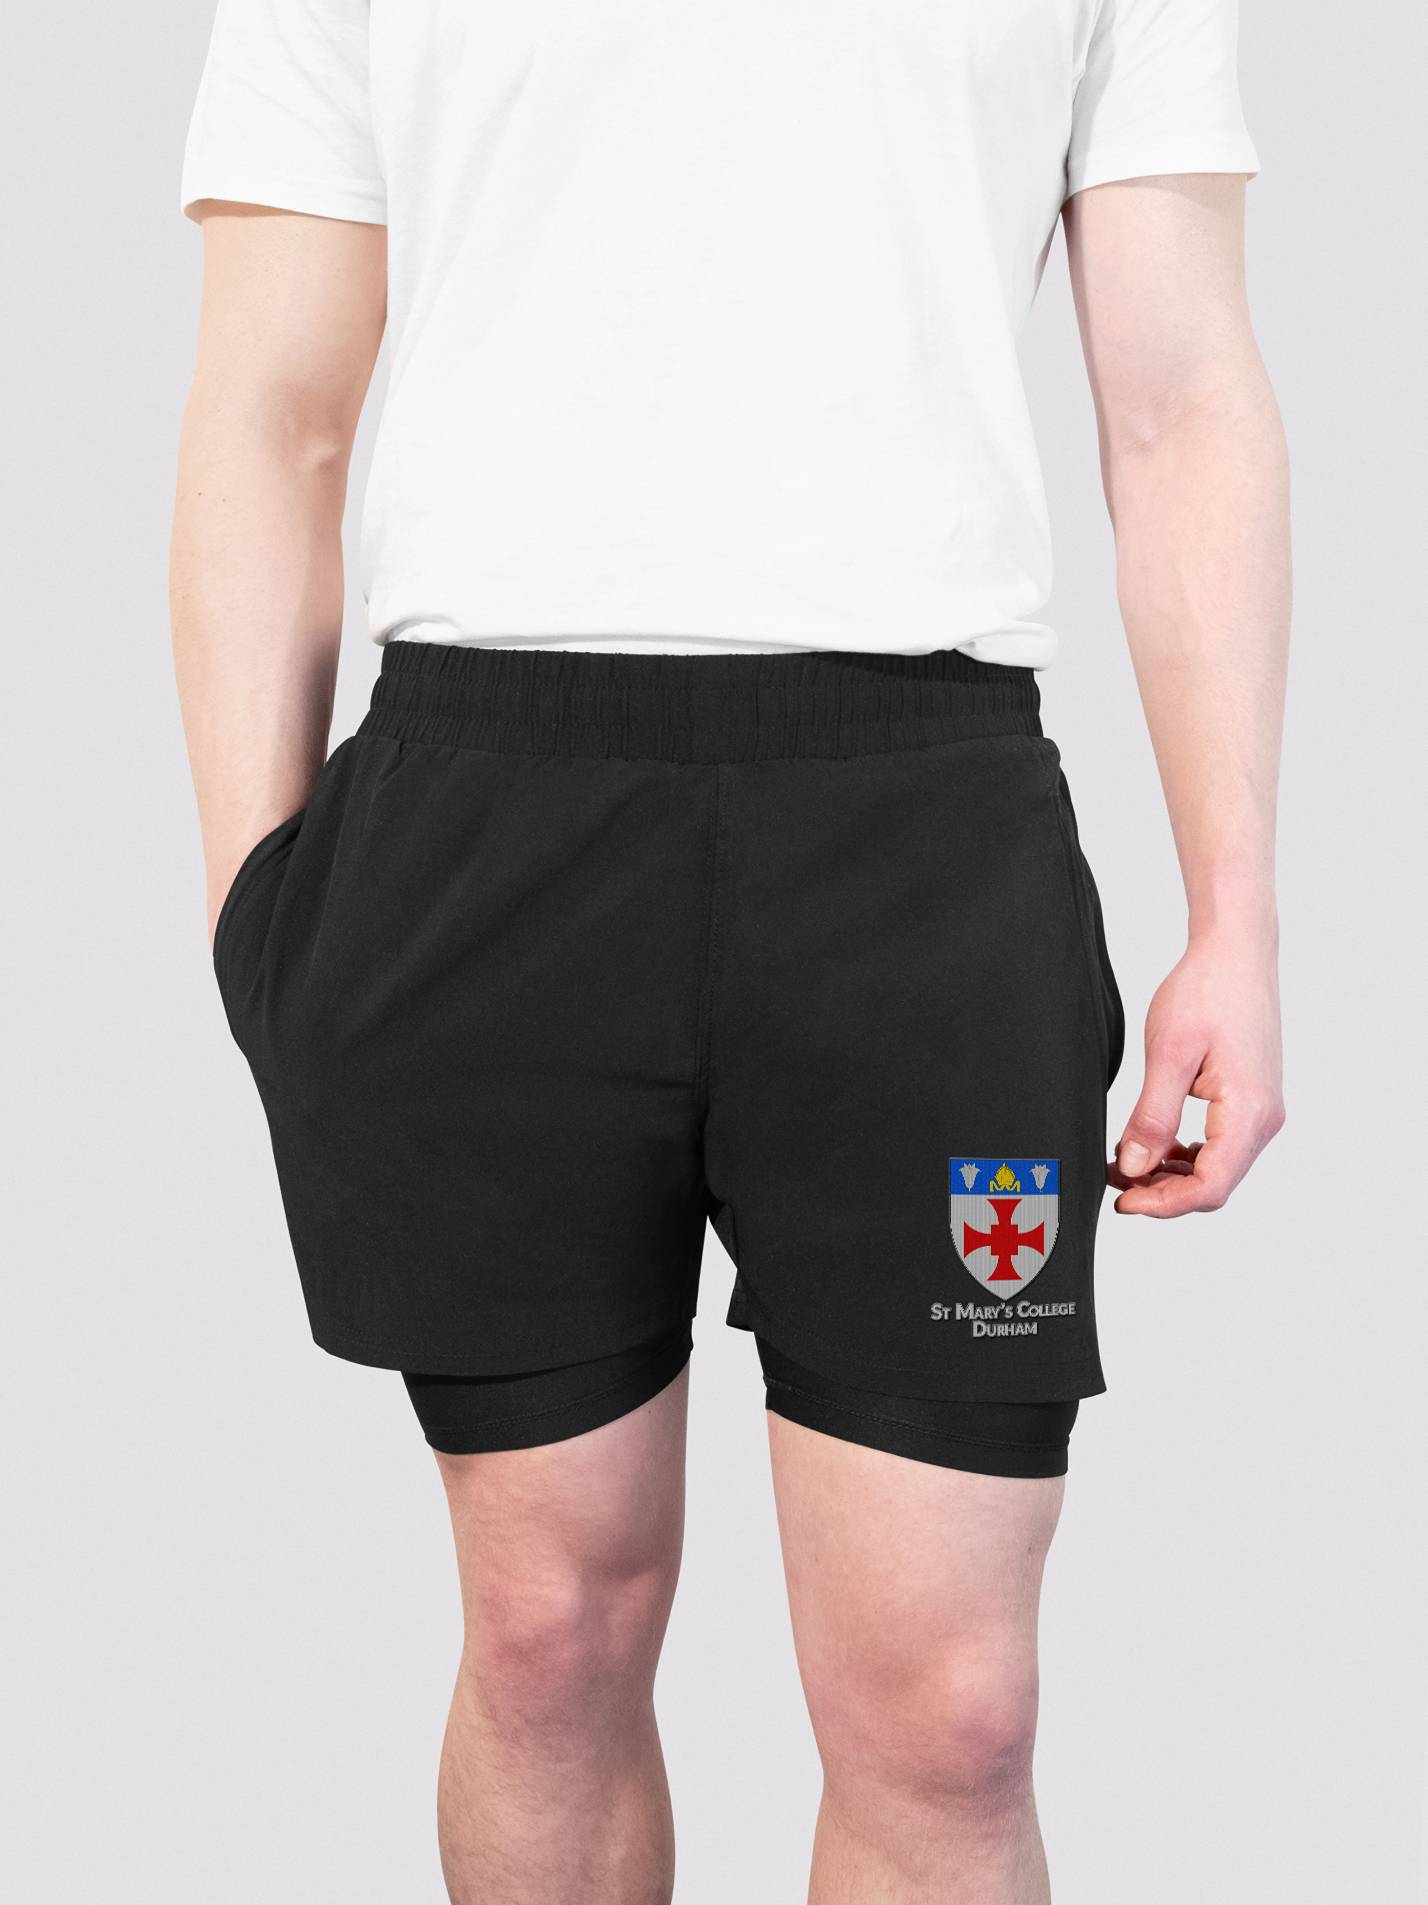 St Mary's College Durham Dual Layer Sports Shorts